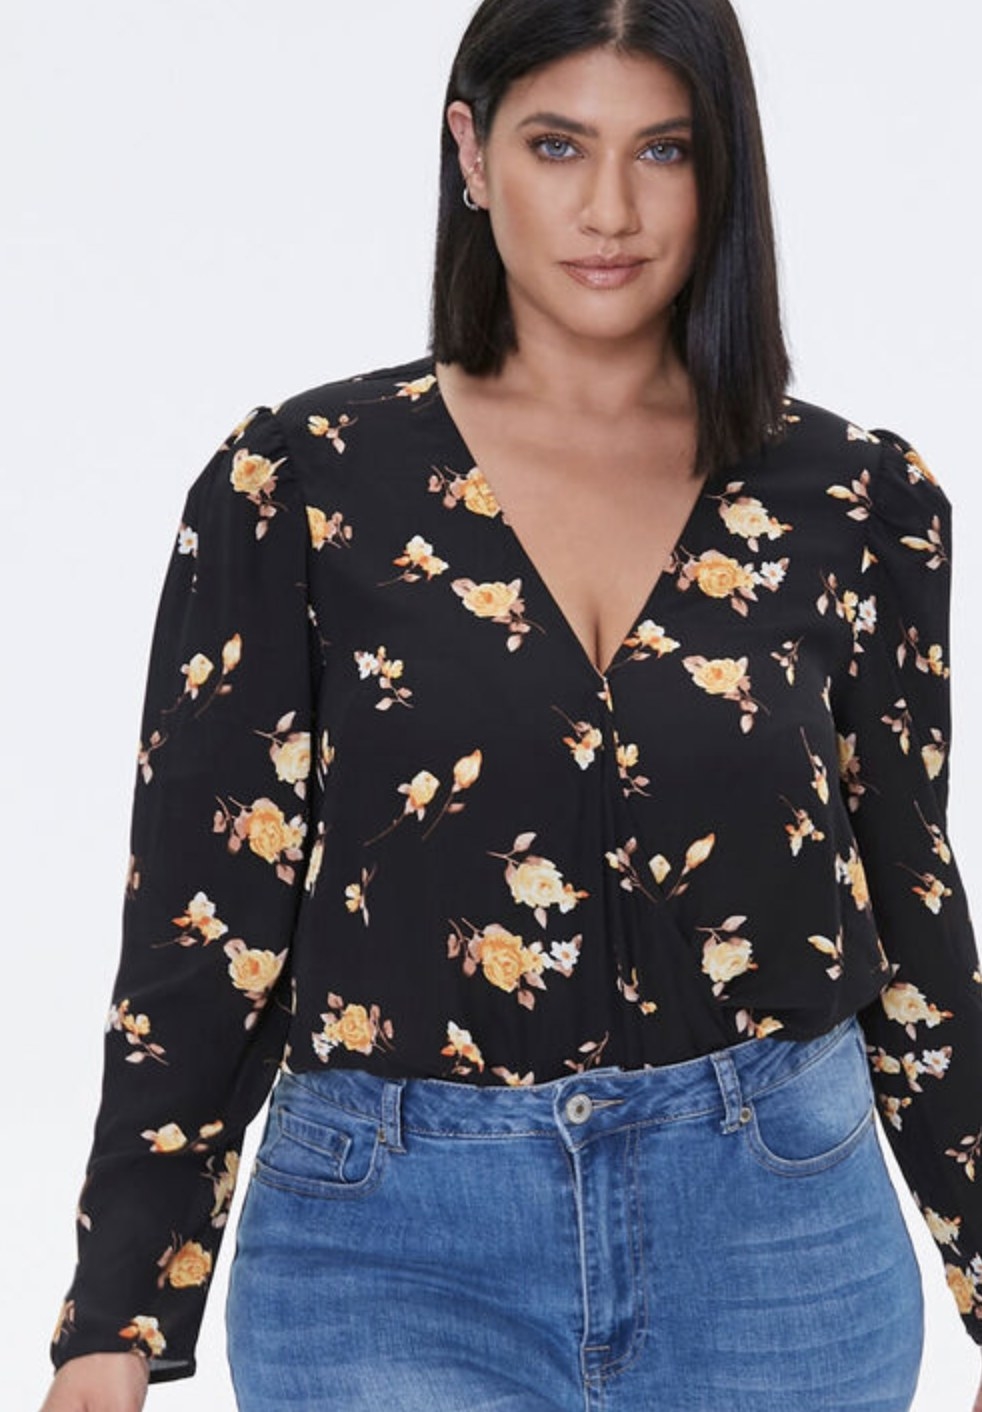 Model is wearing a black and gold floral bodysuit with blue denim jeans